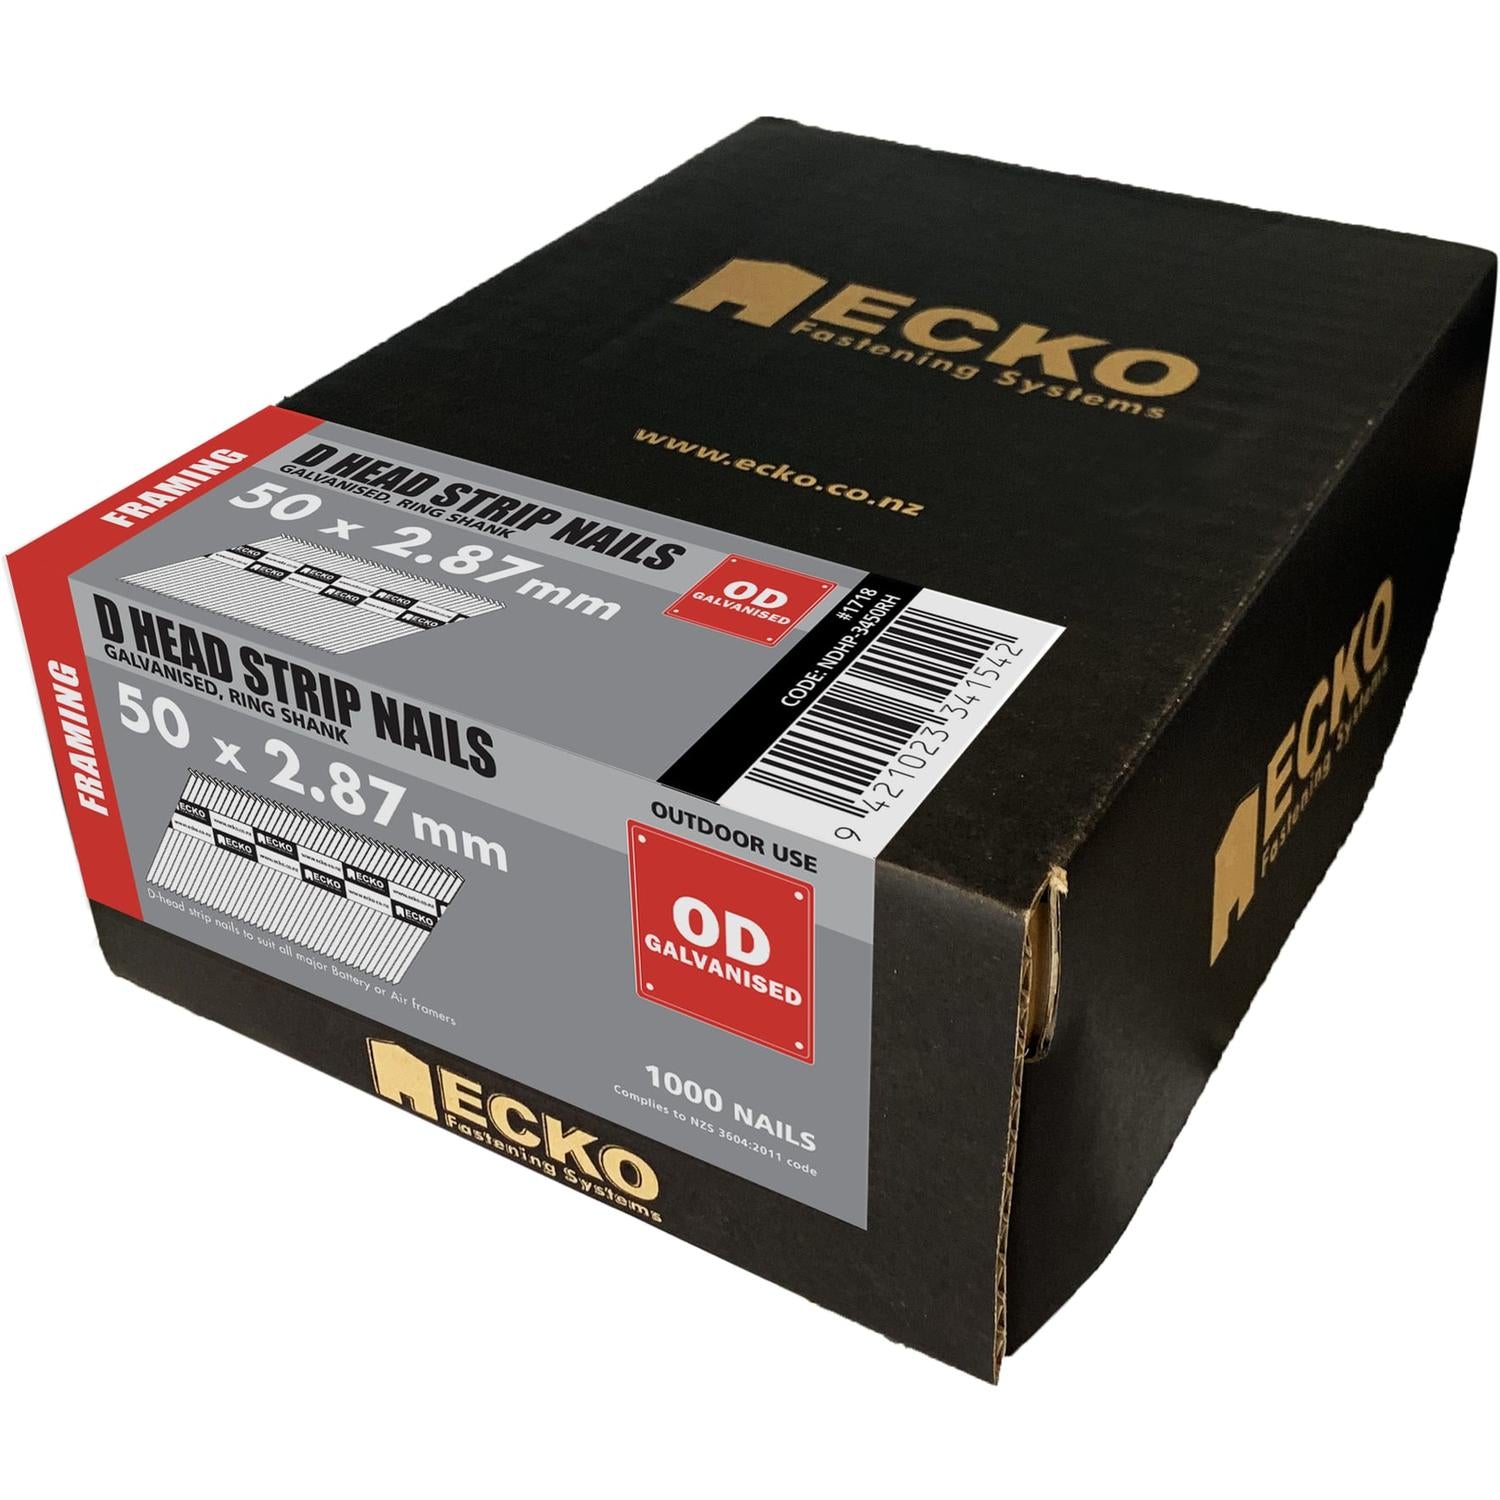 Ecko Collated Nails Gasless Handy Pack 50 X 2.87Mm Galvanised (1000 Box)